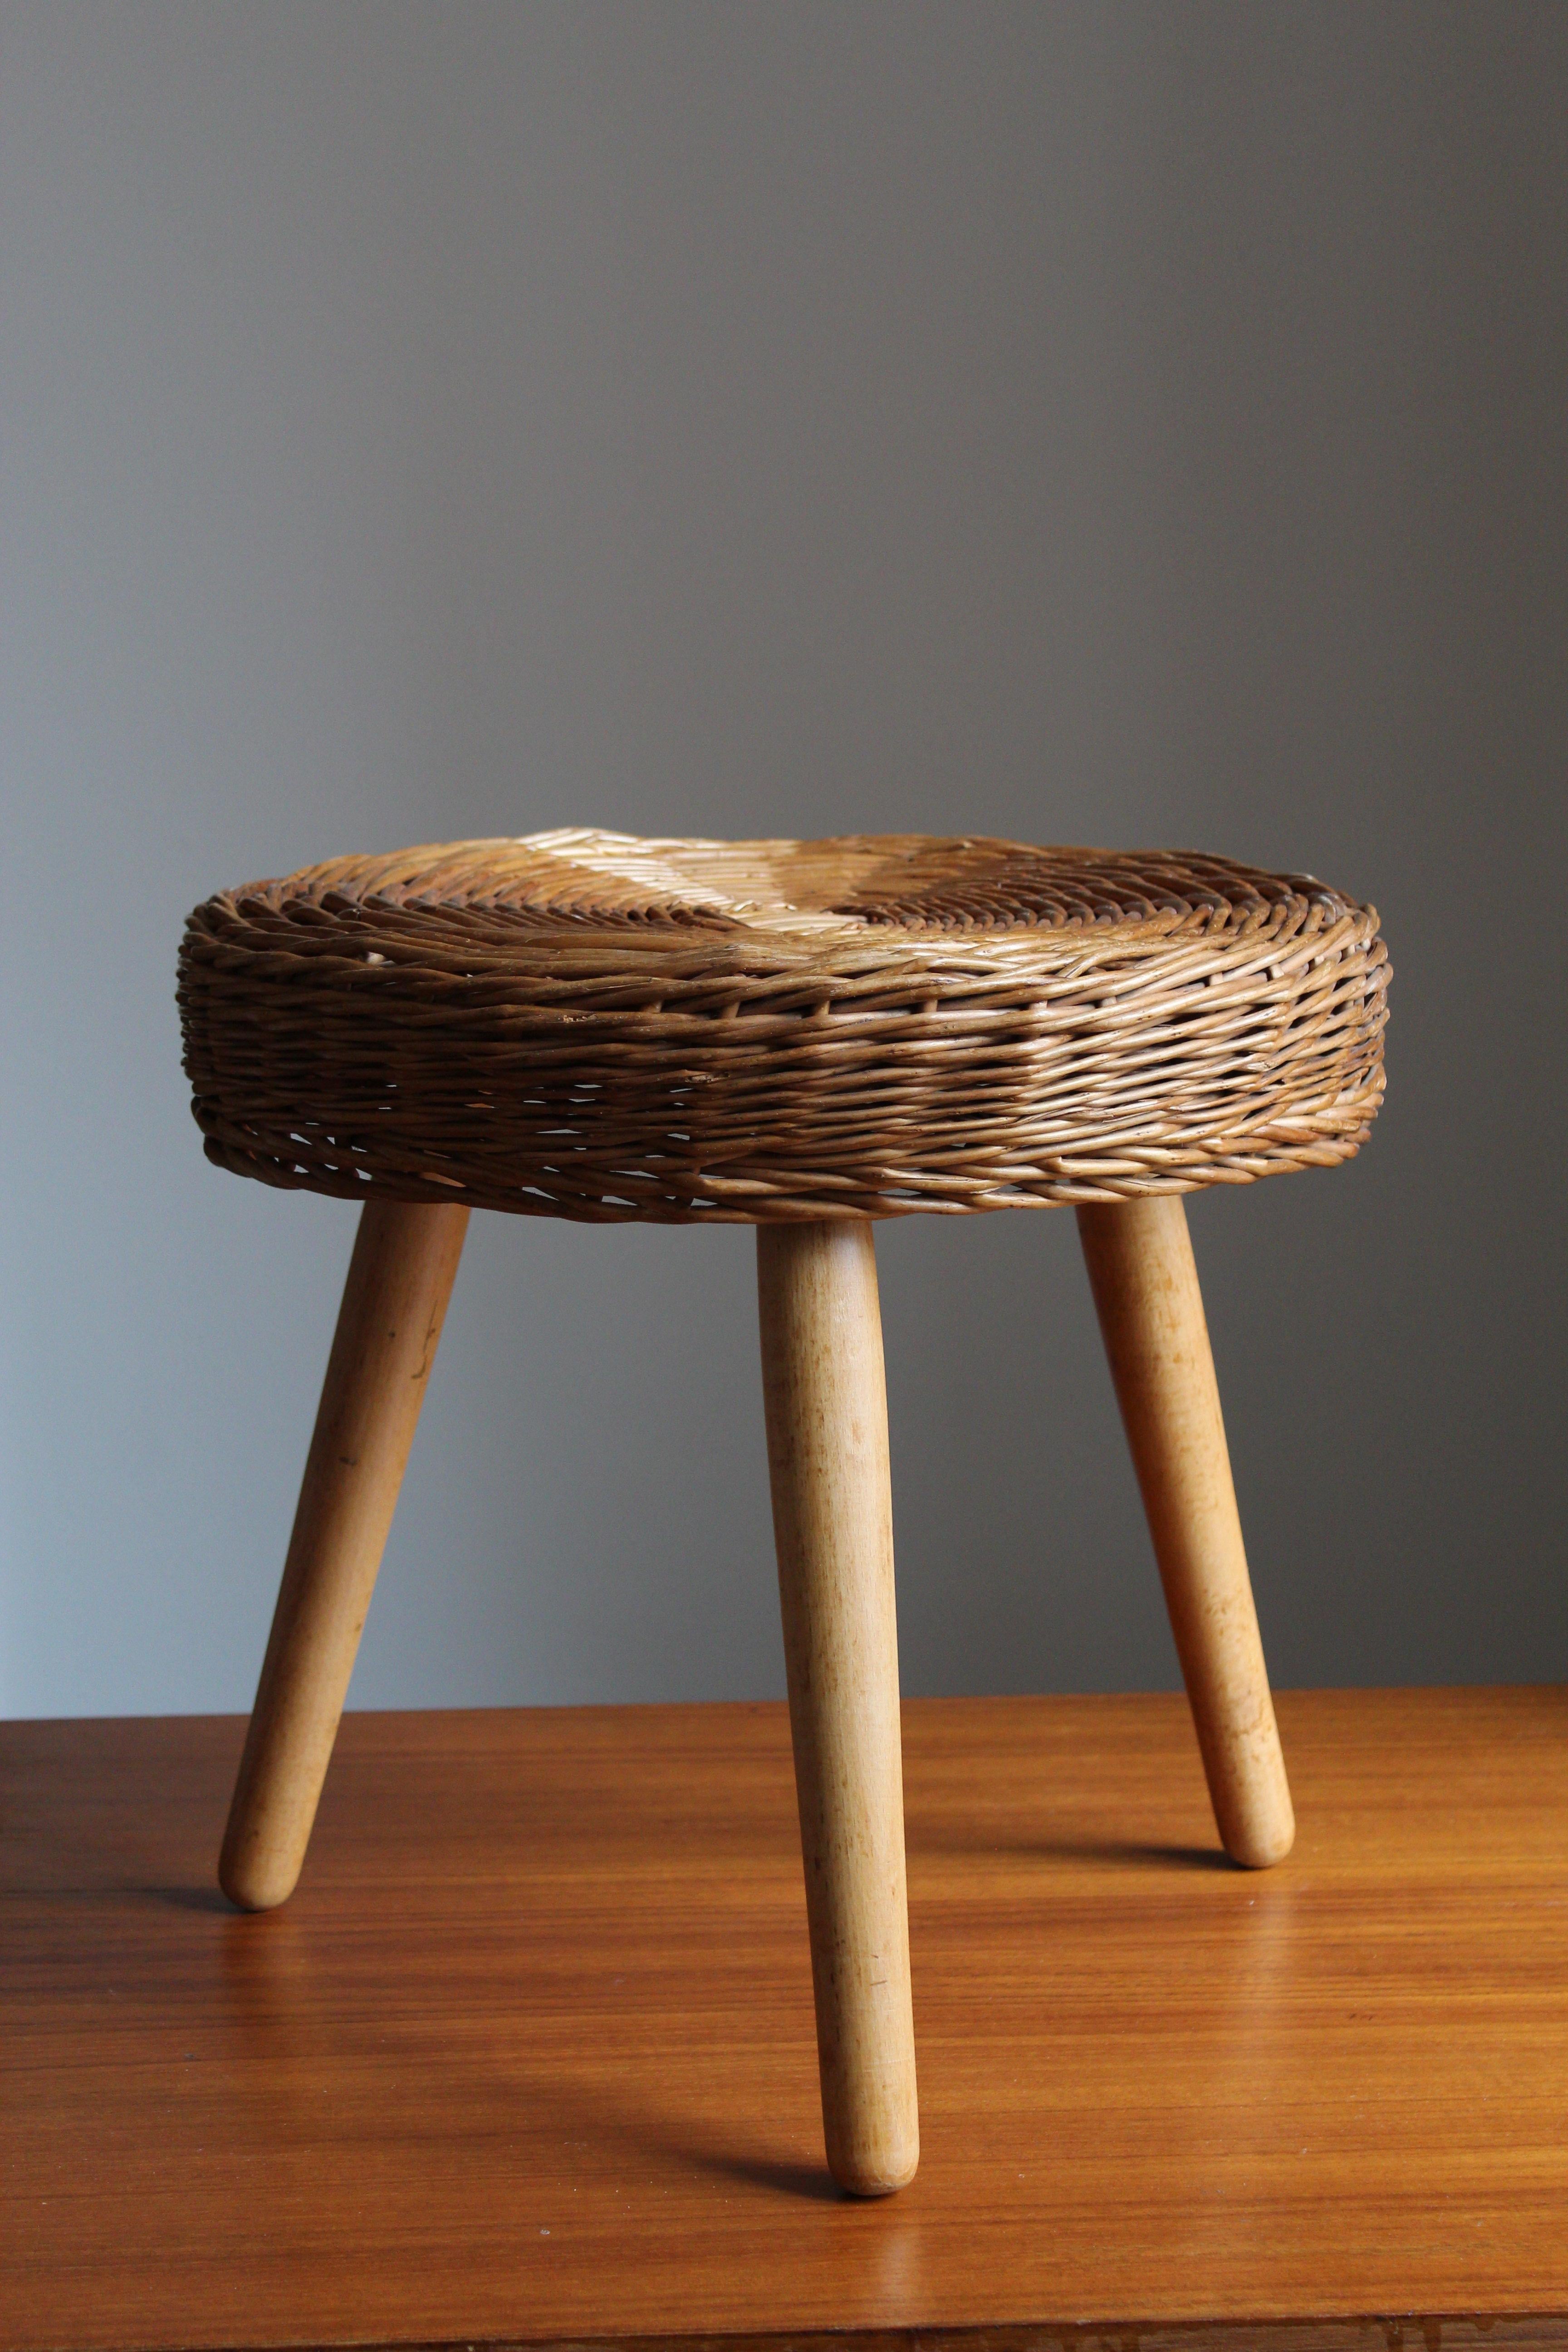 A stool, design attributed to Tony Paul. Features an interesting mix of rattan and finely carved solid wood.

Other designers of Minimalist stools of the period include Charlotte Perriand, Pierre Chapo, Isamu Noguchi, Eero Arnio, and Sori Yanagi.